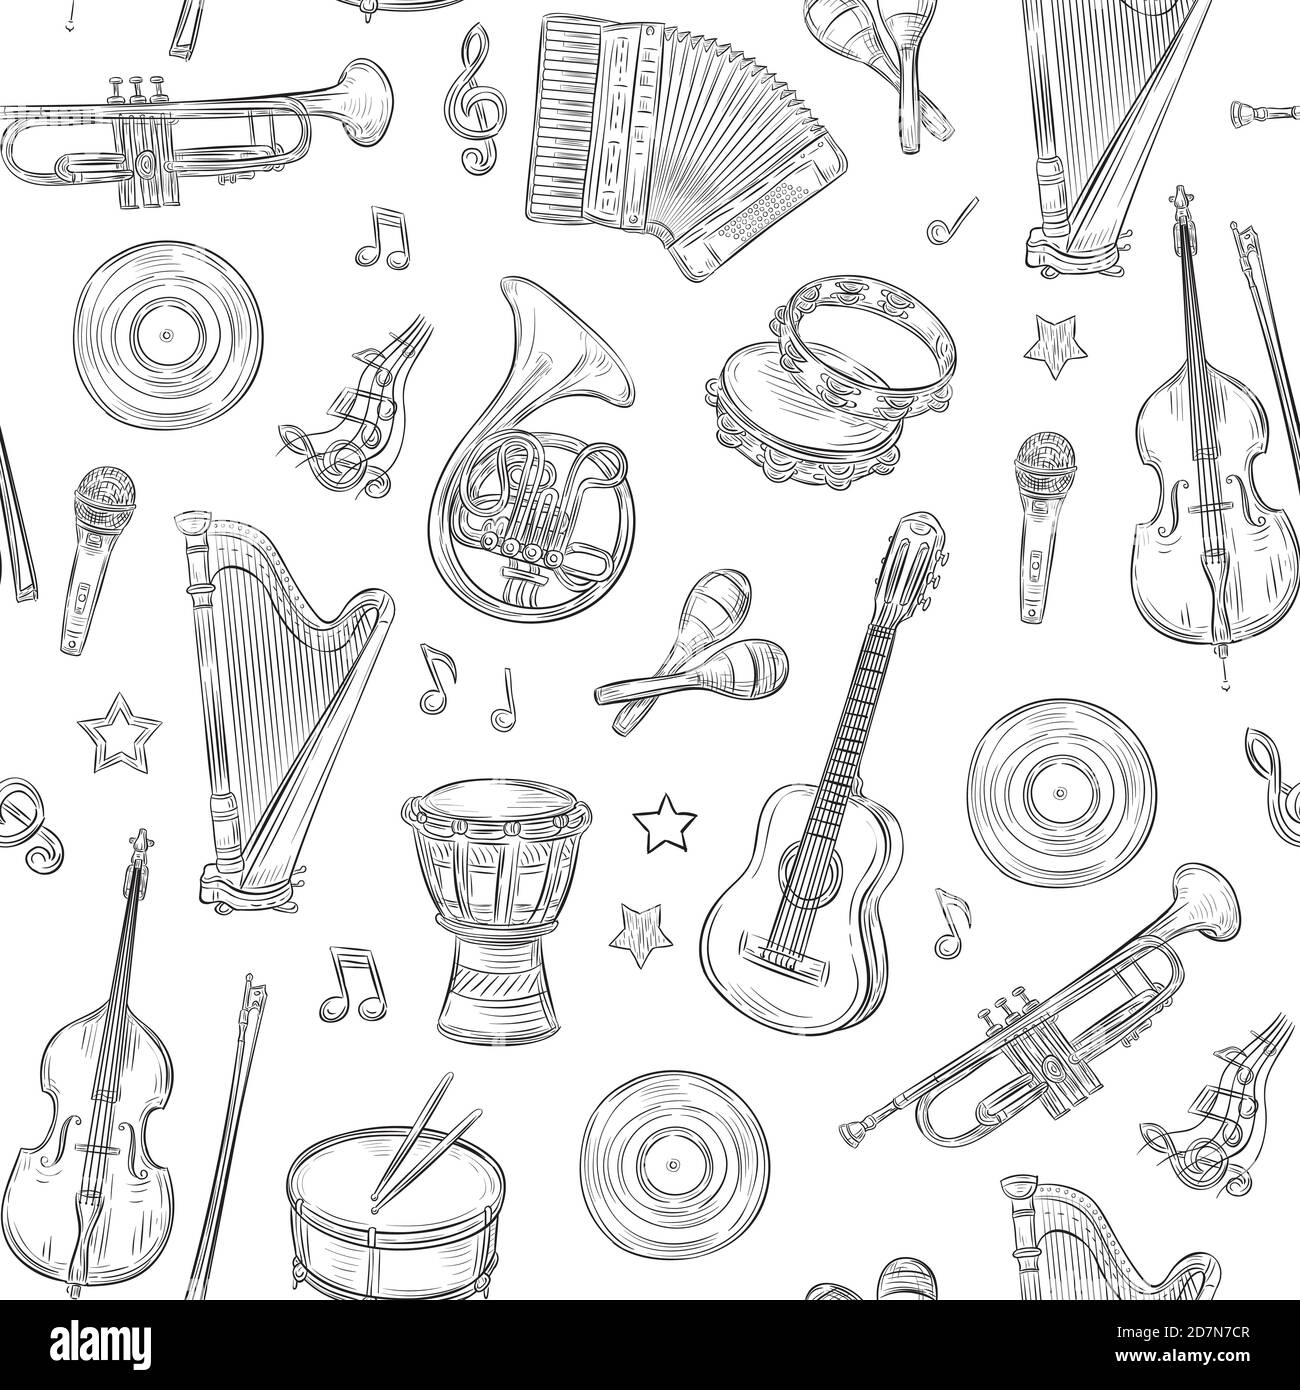 Musical instruments and equipments sketches Stock Vector by ©Seamartini  97036934